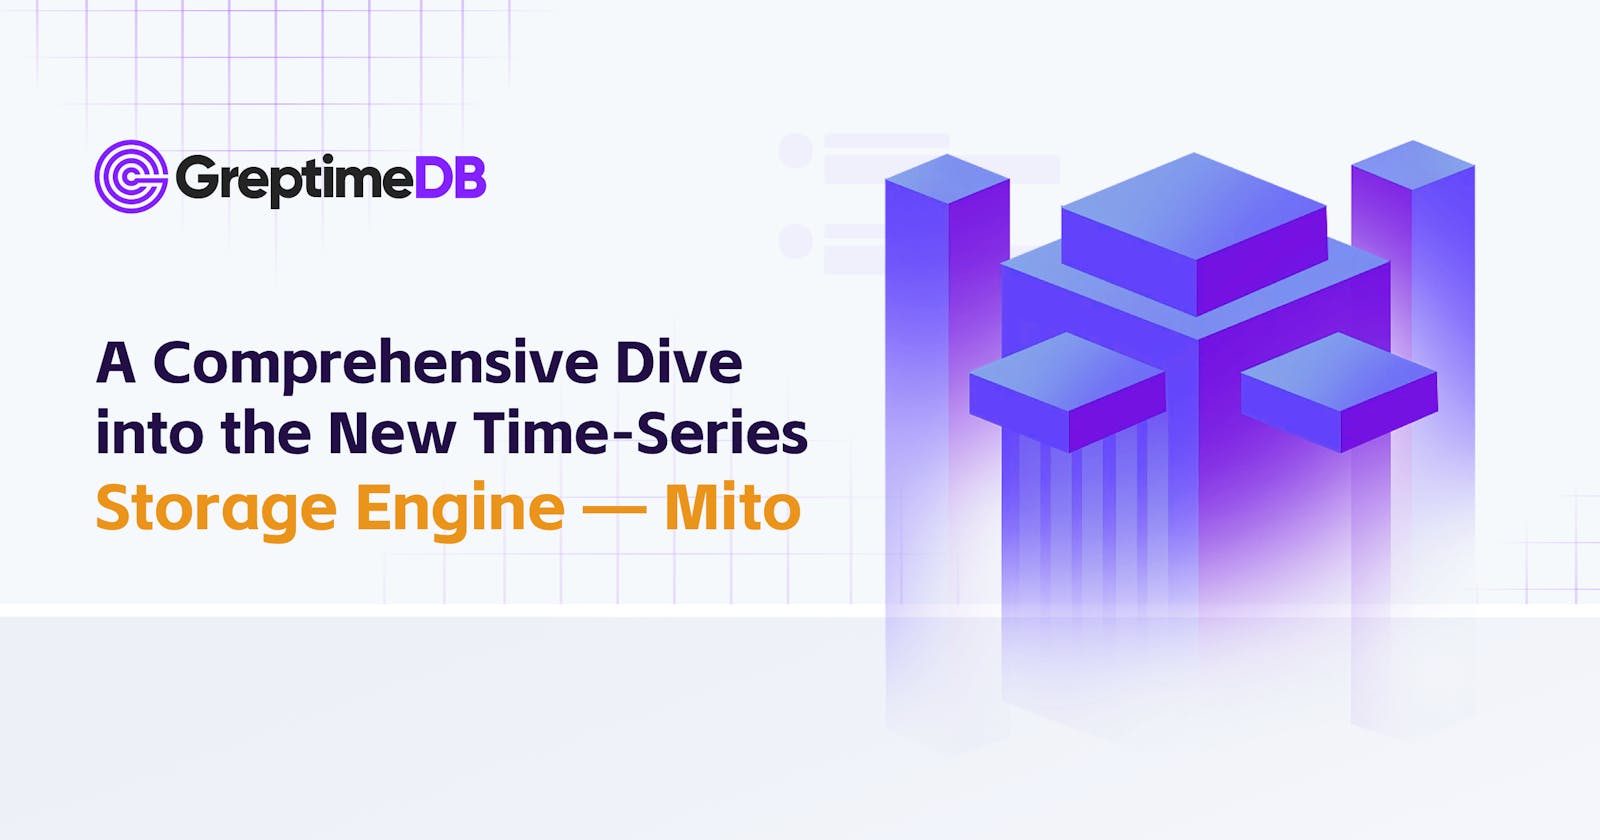 A Comprehensive Dive into the New Time-Series Storage Engine - Mito